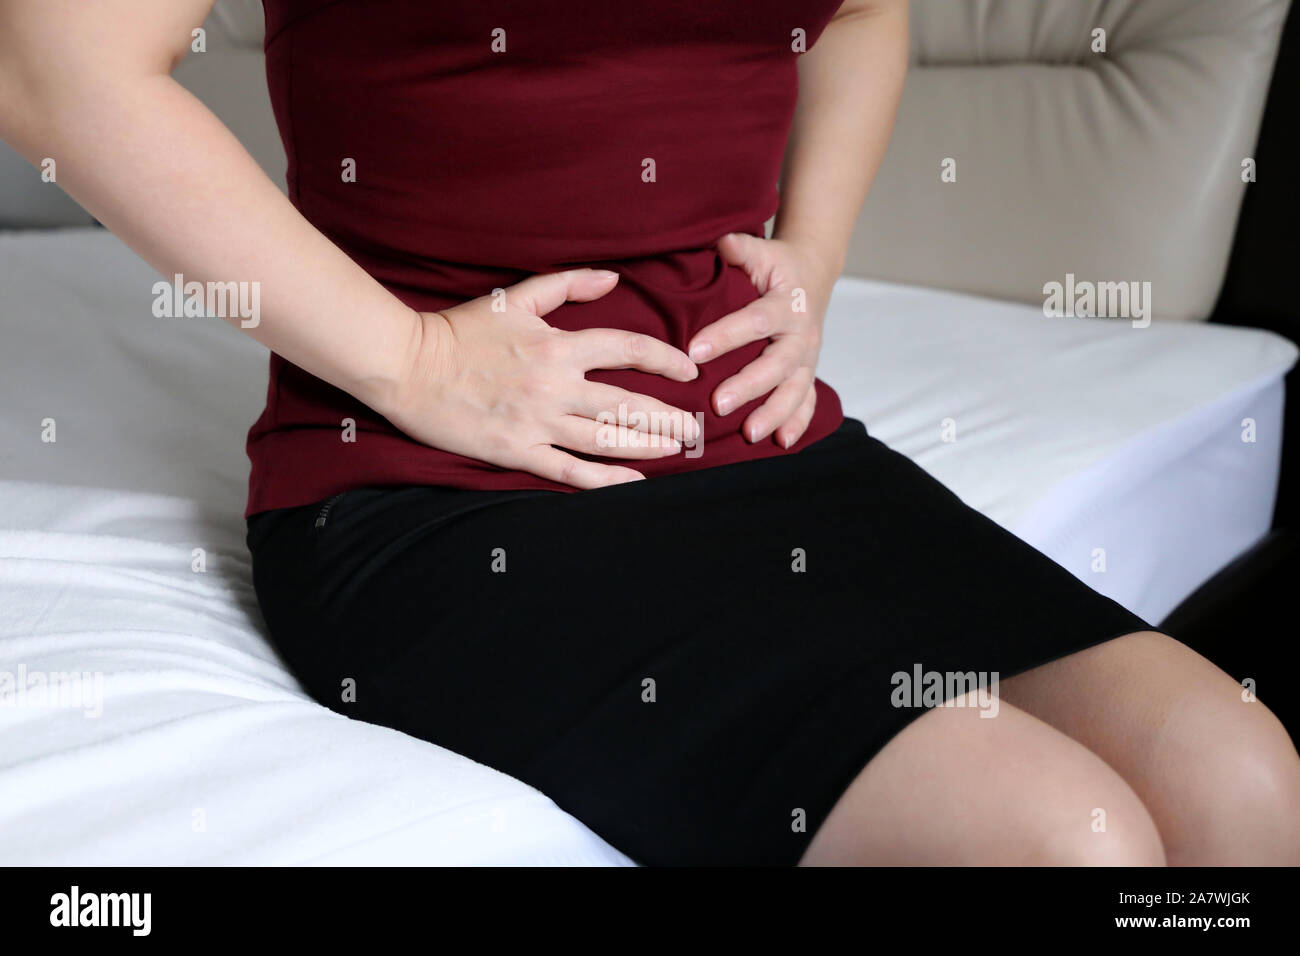 Woman suffering from pain in abdomen. Slim girl in black skirt sitting on bed clutching her belly, concept of indigestion, stomach ache, menstruation Stock Photo